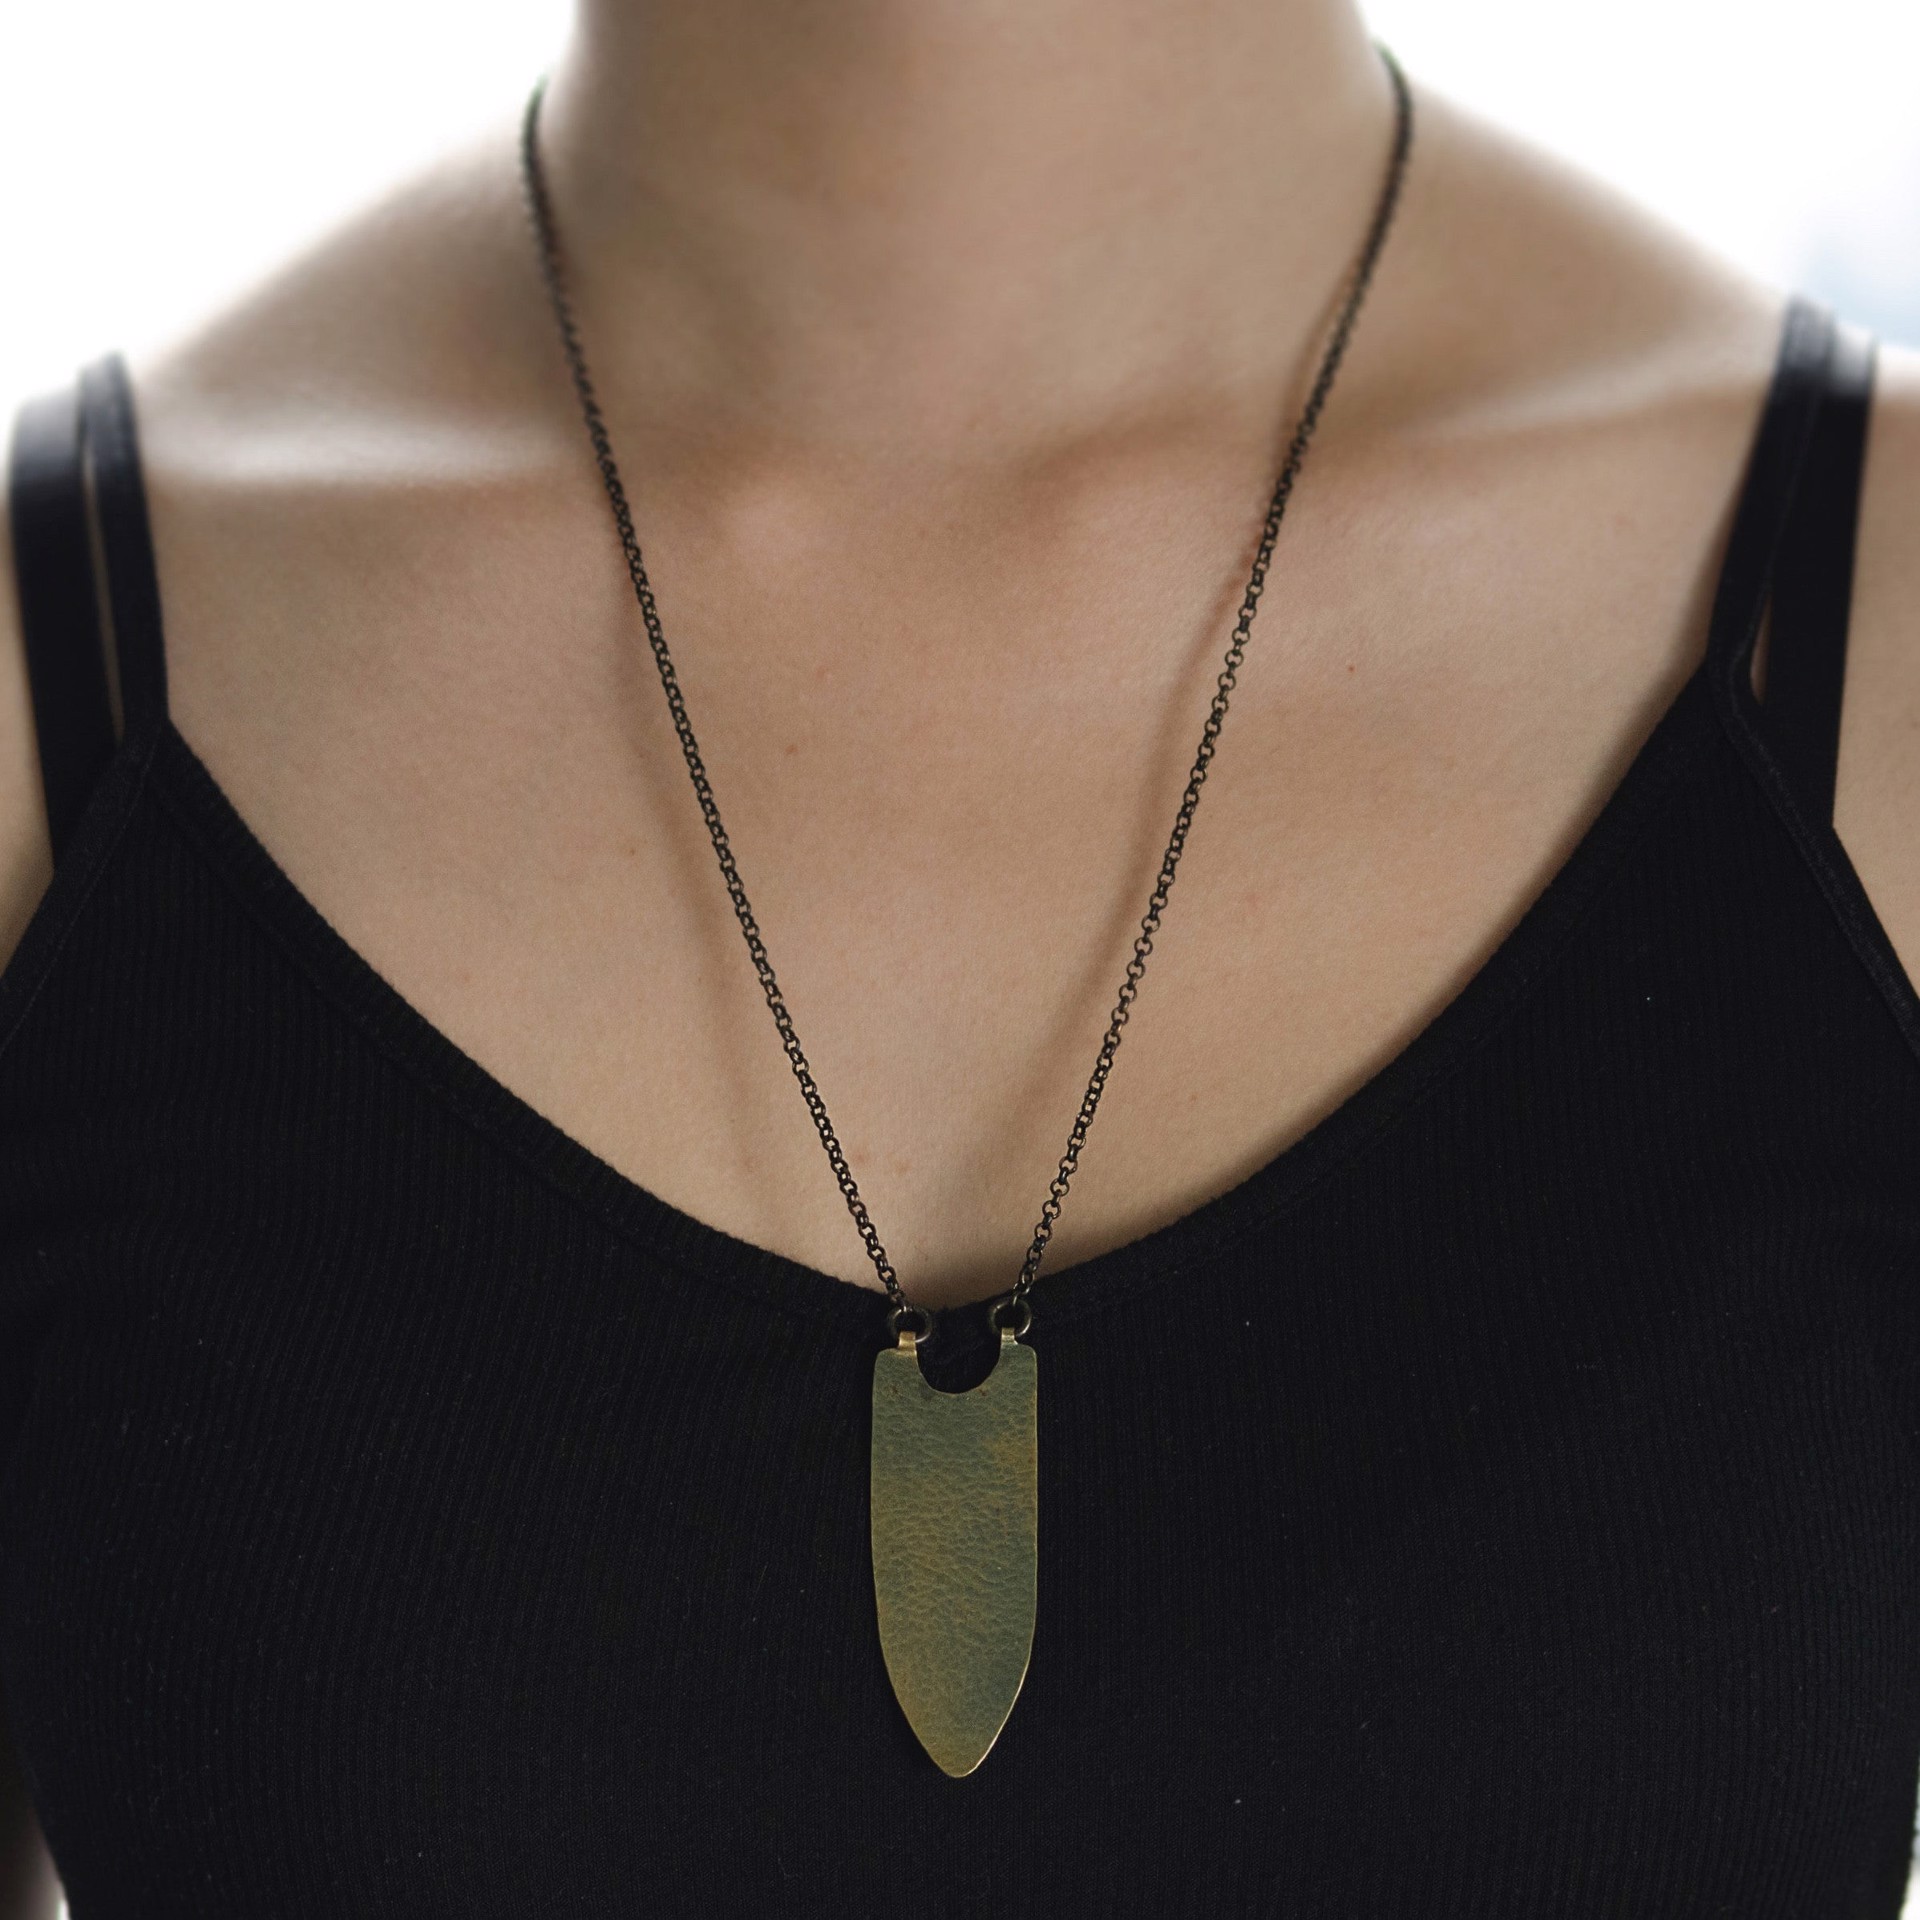 Banner Necklace in Antiqued Brass by Clementine & Co. Jewelry